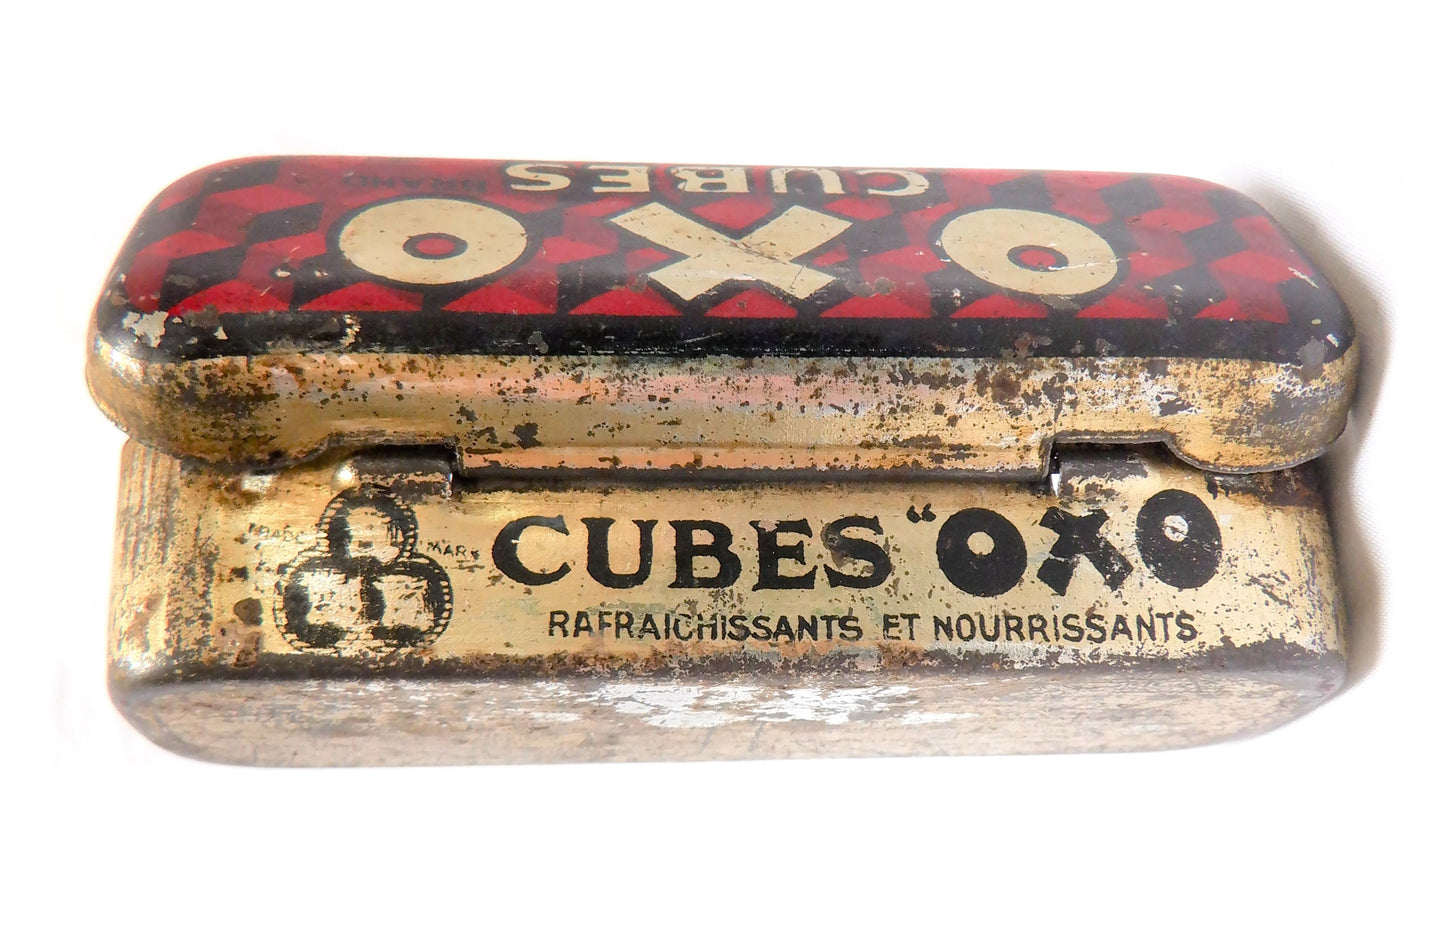 50 Year Old Oxo Tins, Oxo cubes are beef stock cubes and ha…